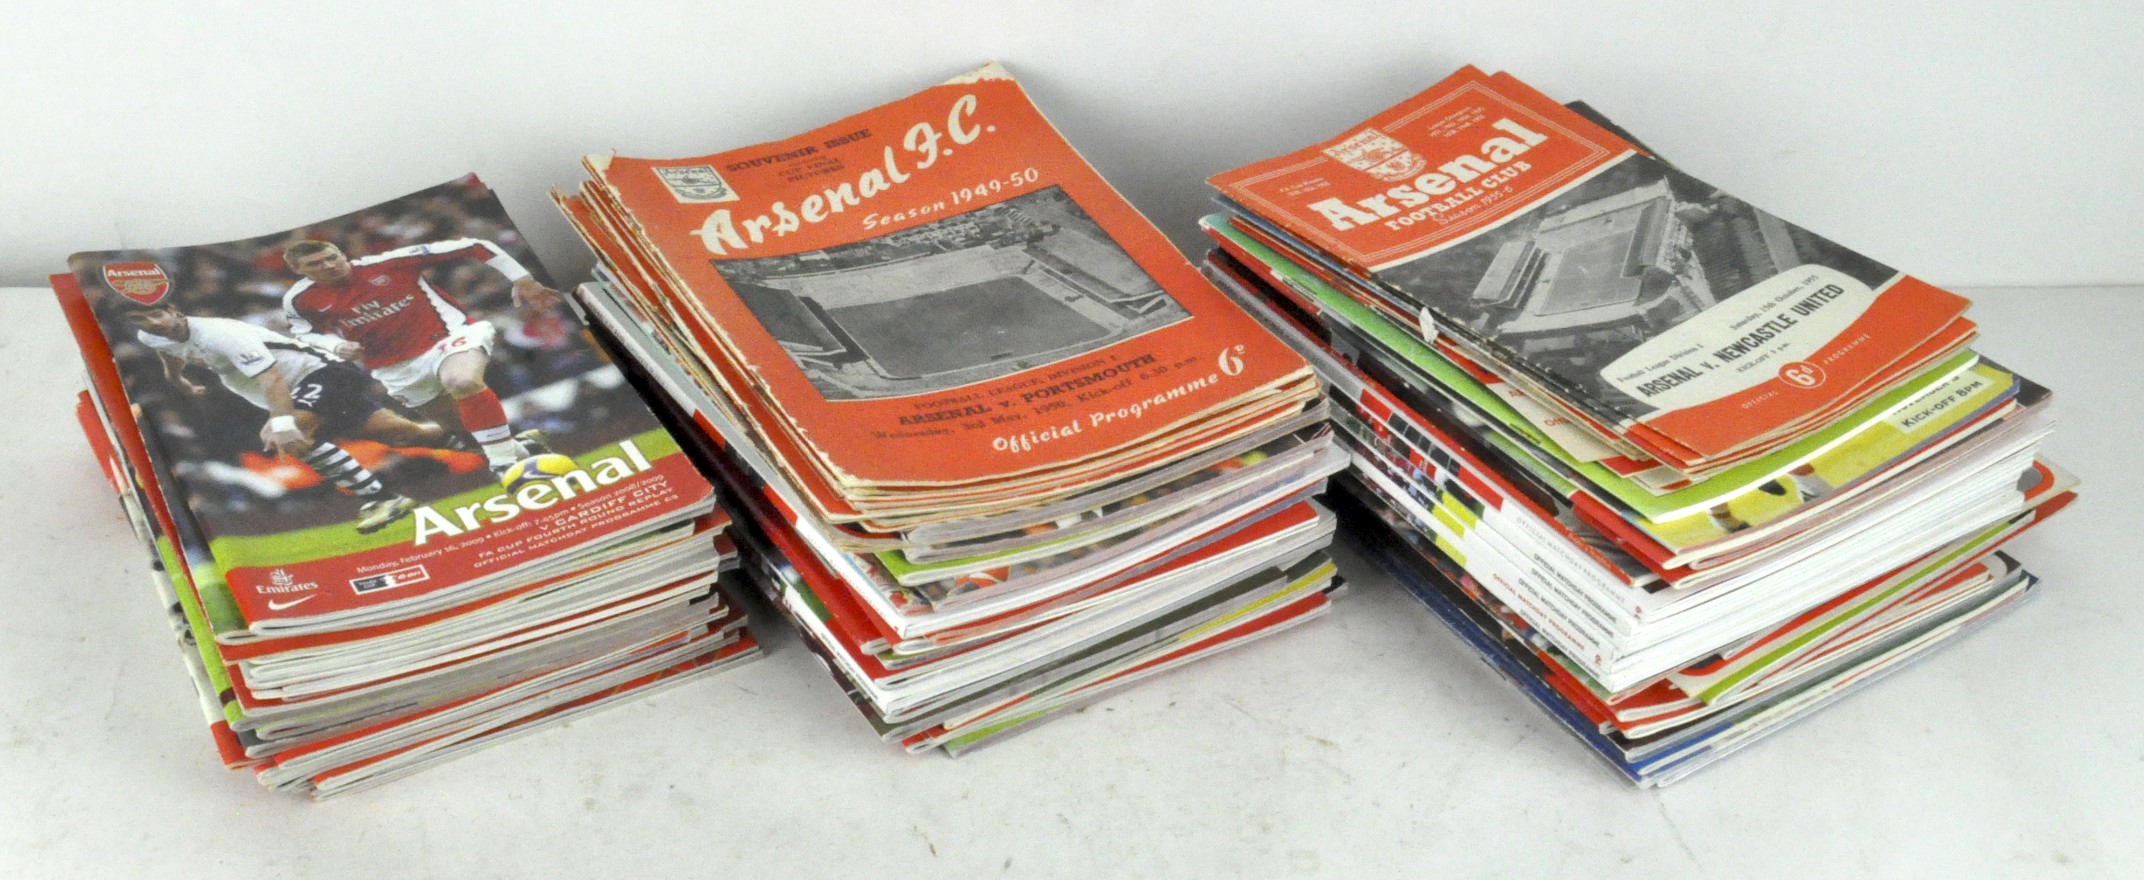 A collection of vintage Arsenal football programmes, dating from 1949/50 - 2020/21,